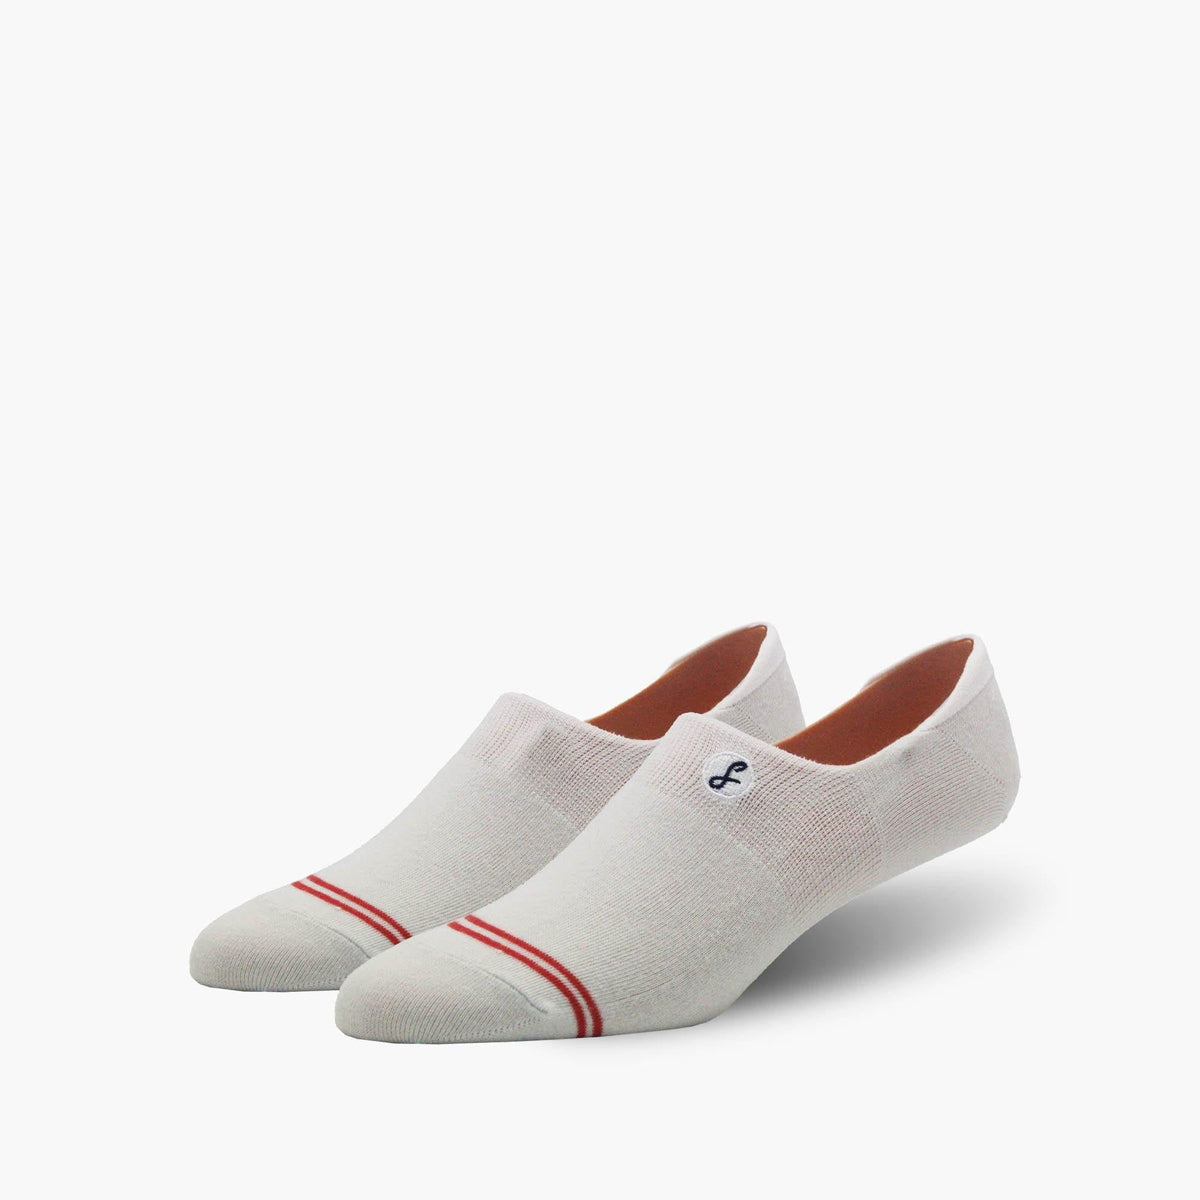 Plain Off-White Coral Striped Combed Cotton No-Show Swanky Socks - SwankySocks